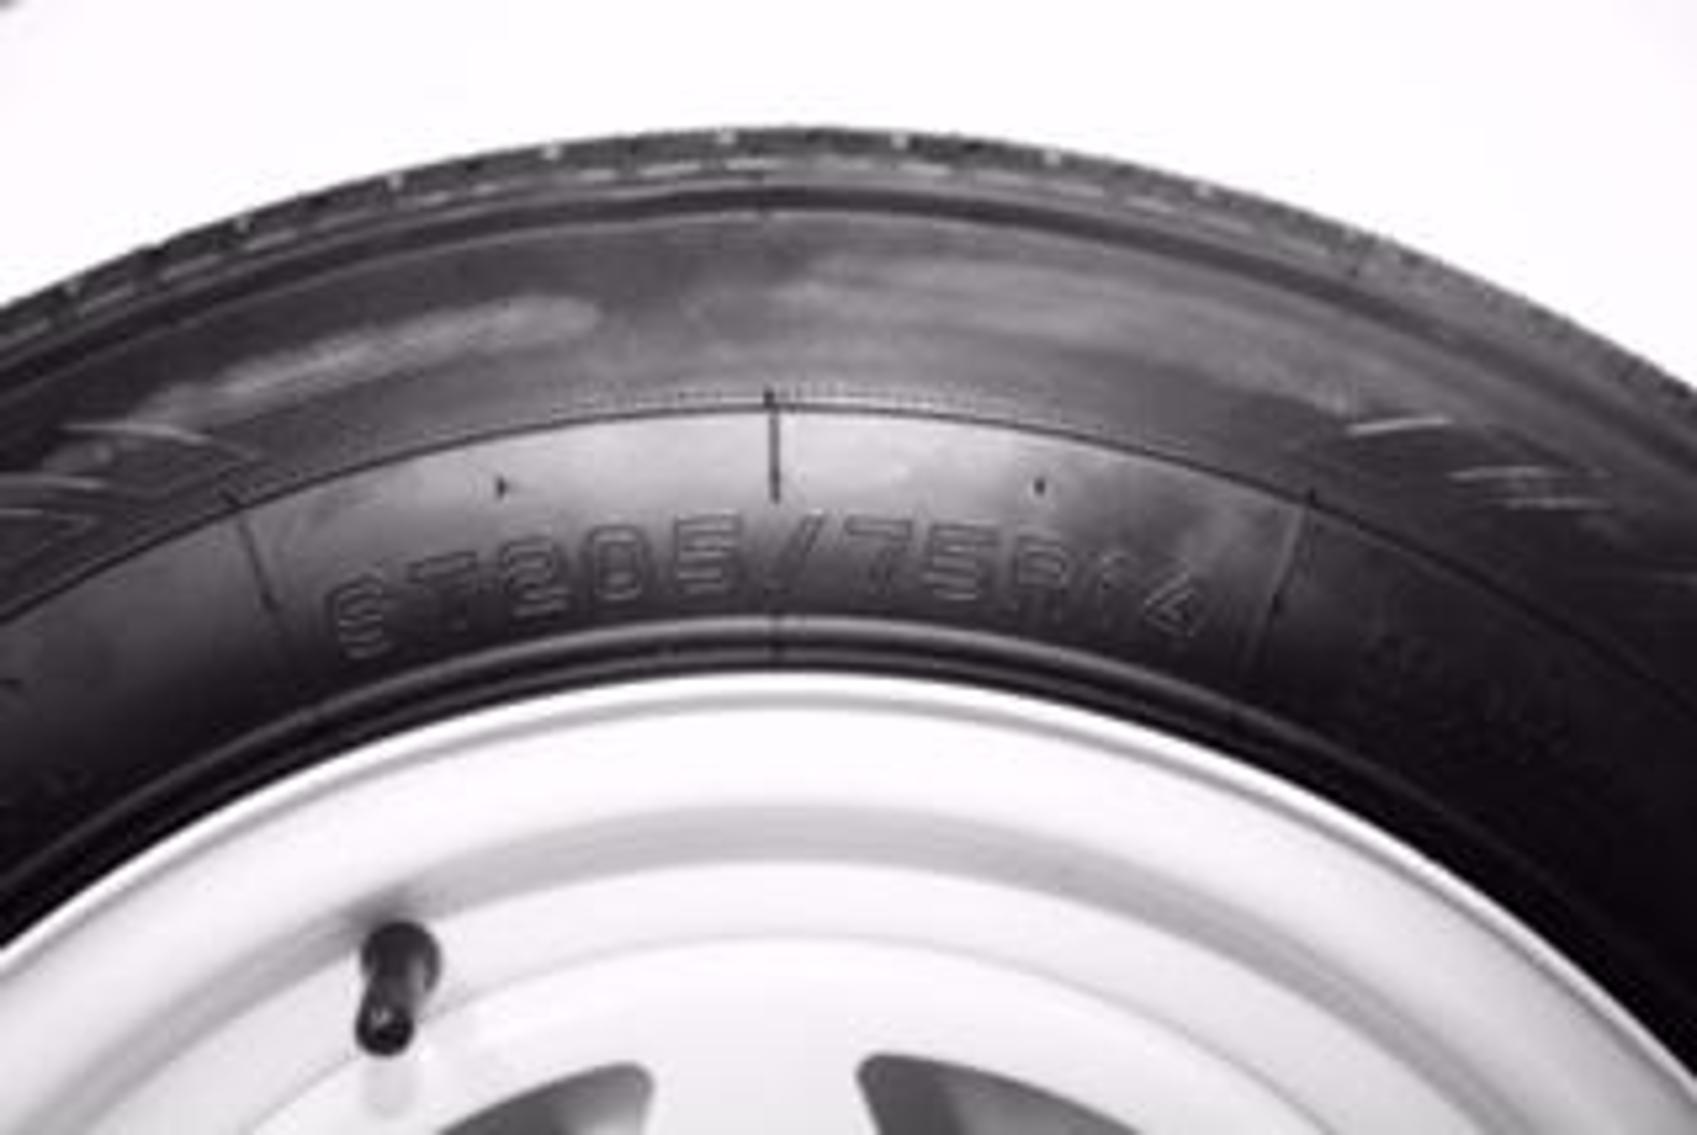 New Trailers Tires and Rims - 50 Lots